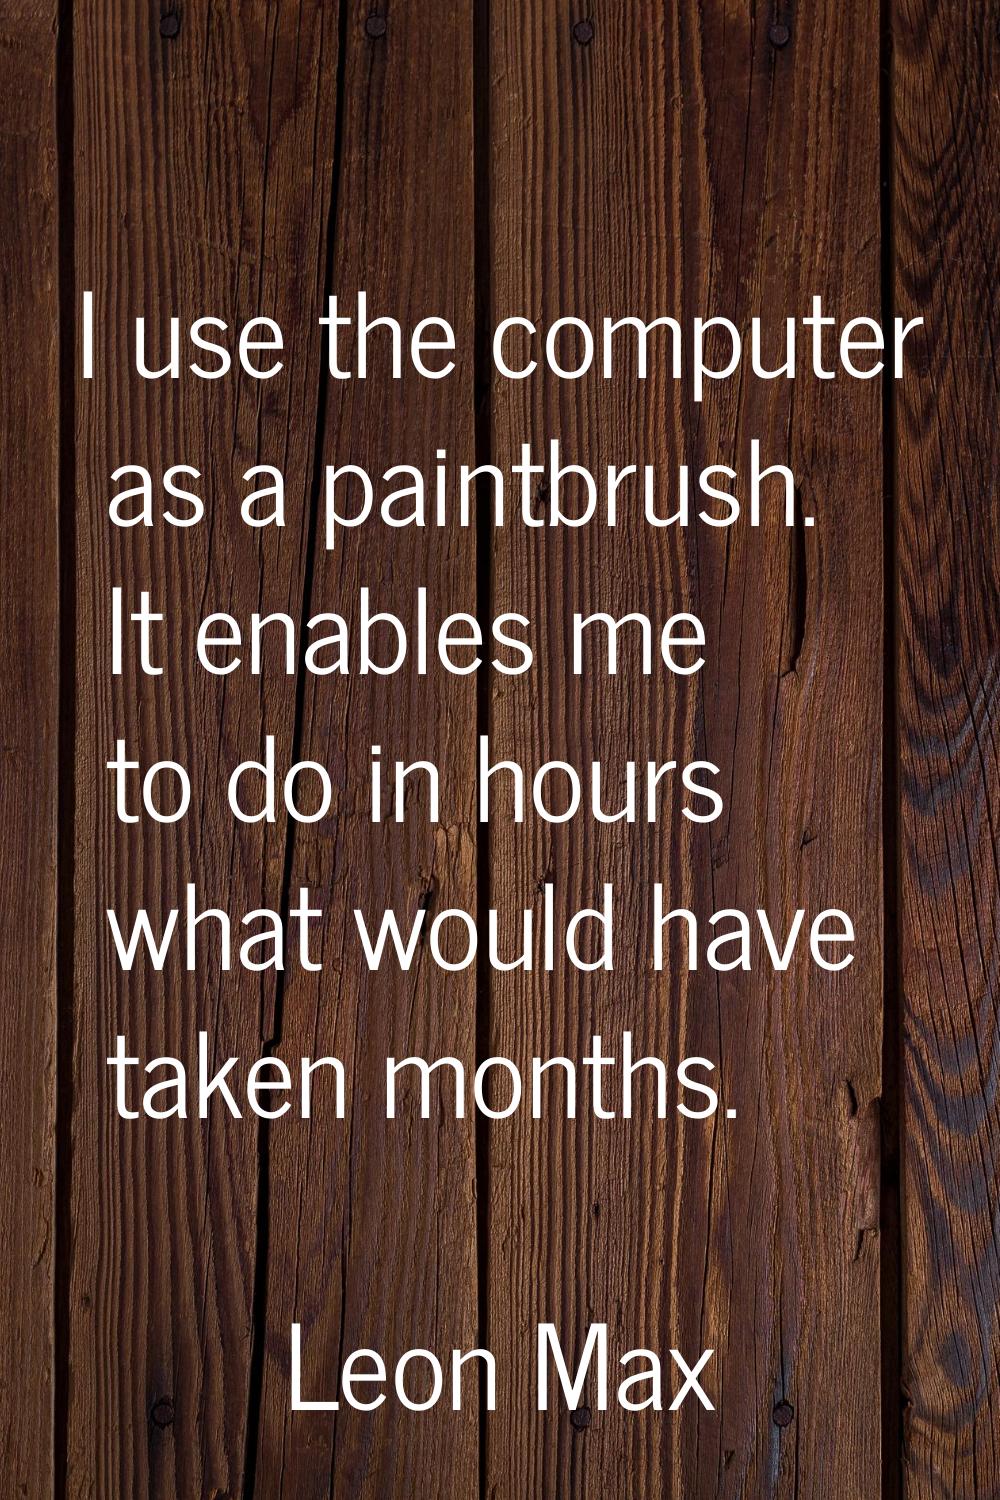 I use the computer as a paintbrush. It enables me to do in hours what would have taken months.